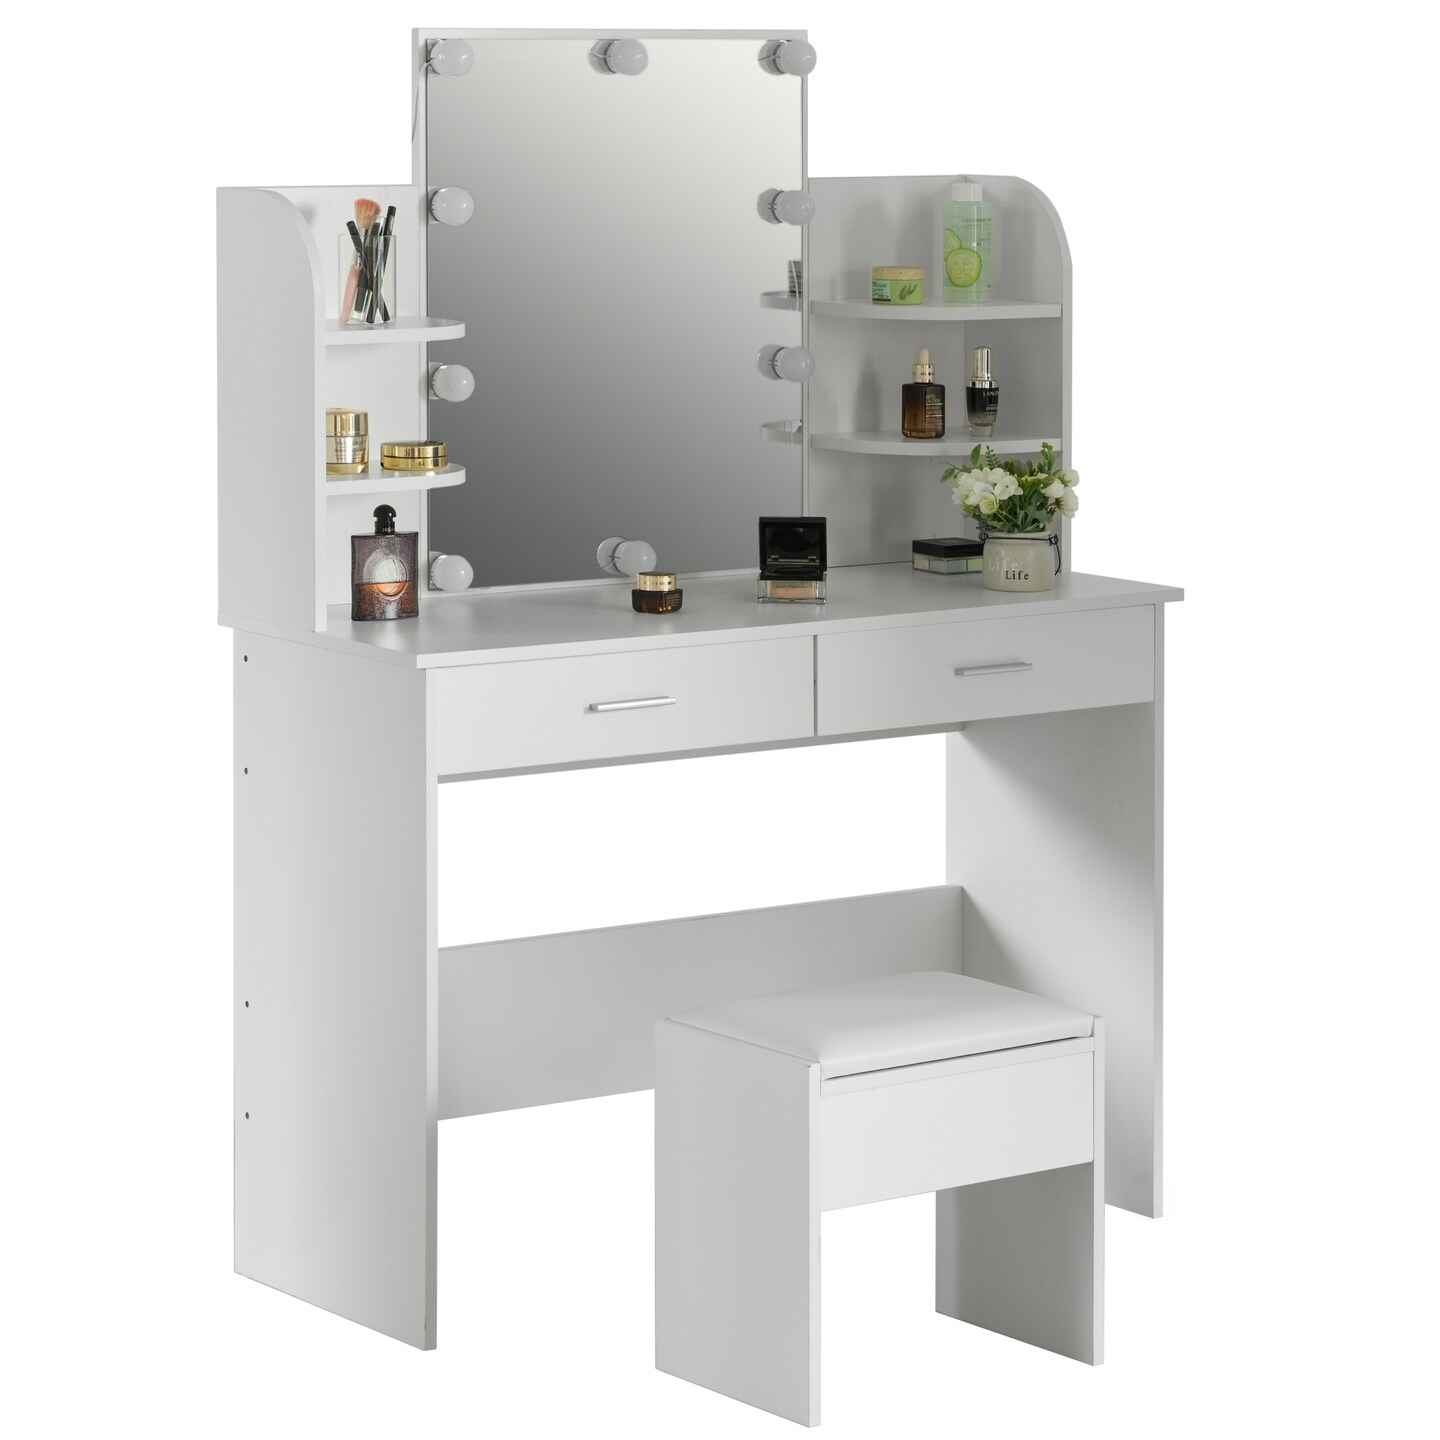 wholesale clear vanity dressing table lucite